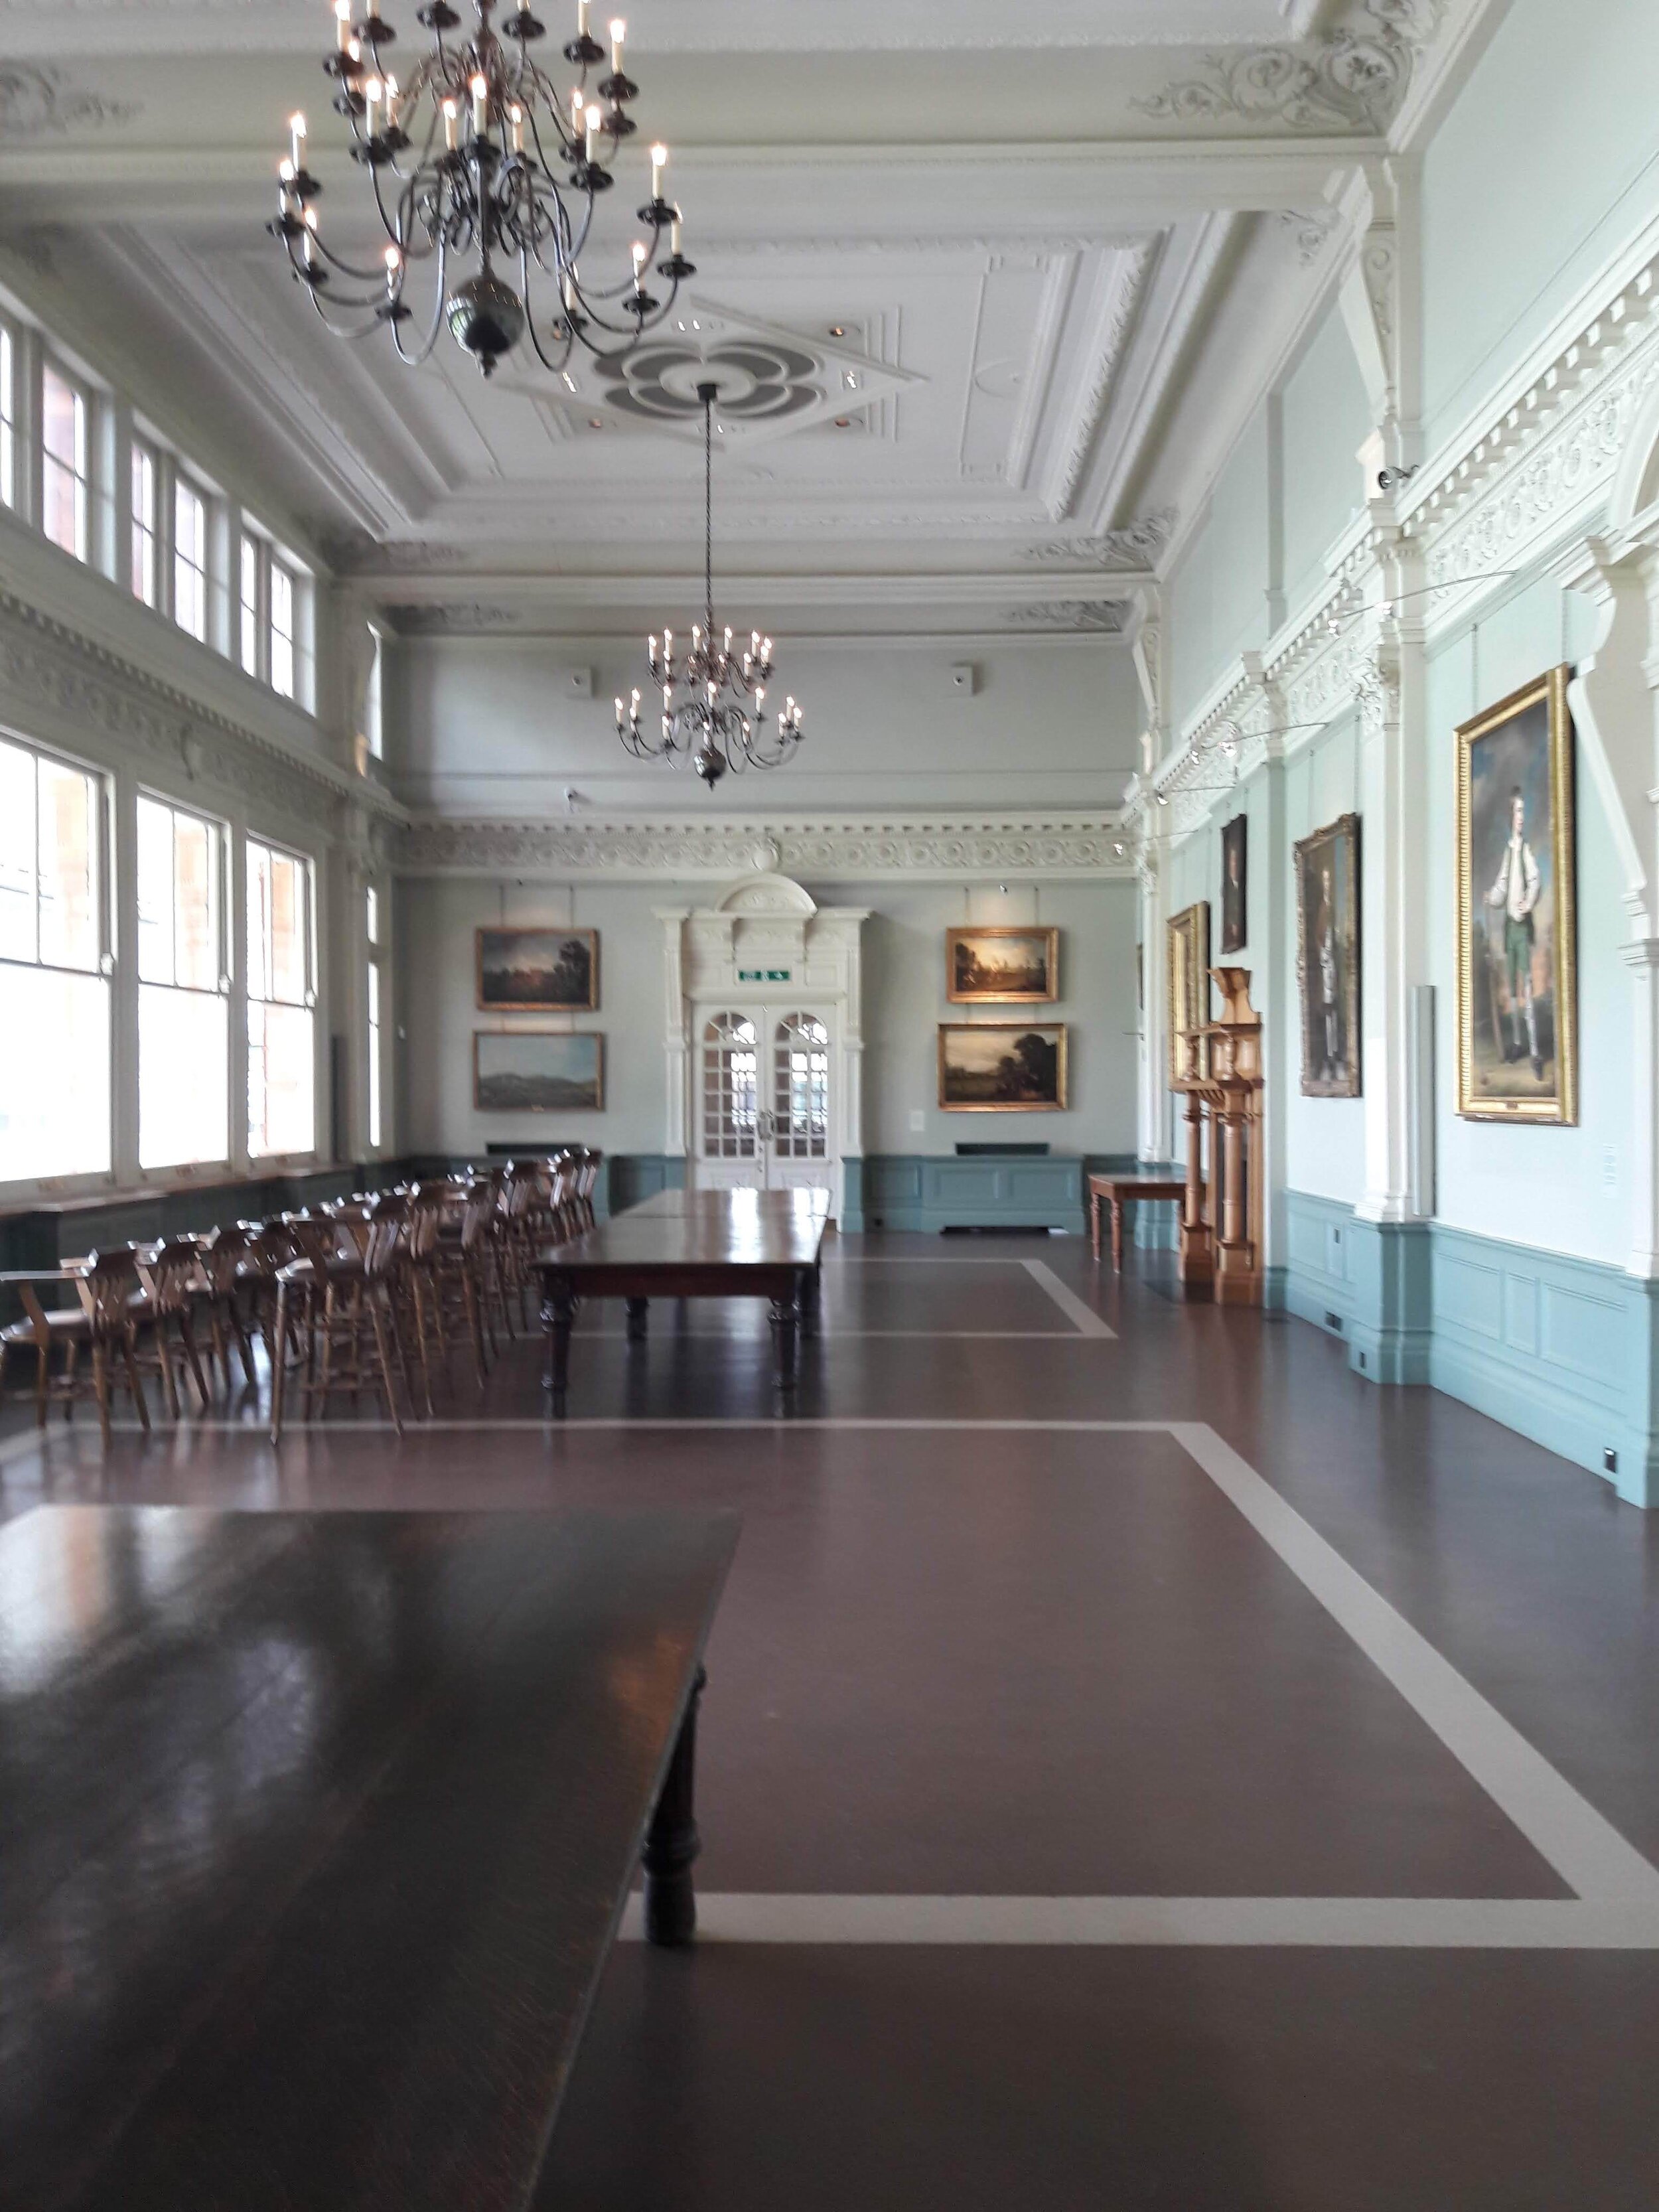 The Long Gallery, Lord's Cricket Ground